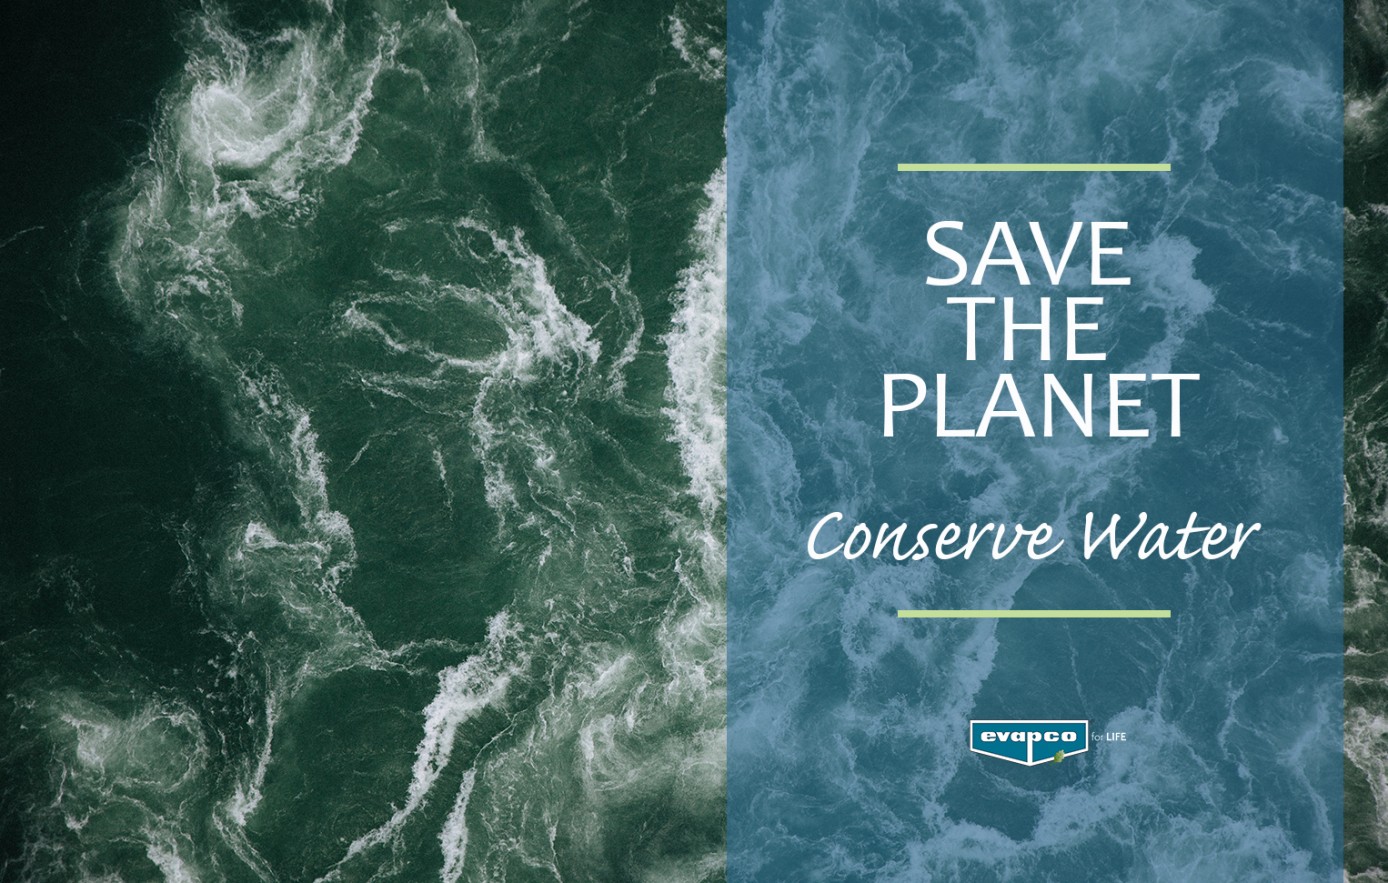 Conserve water with the new eco-Air series